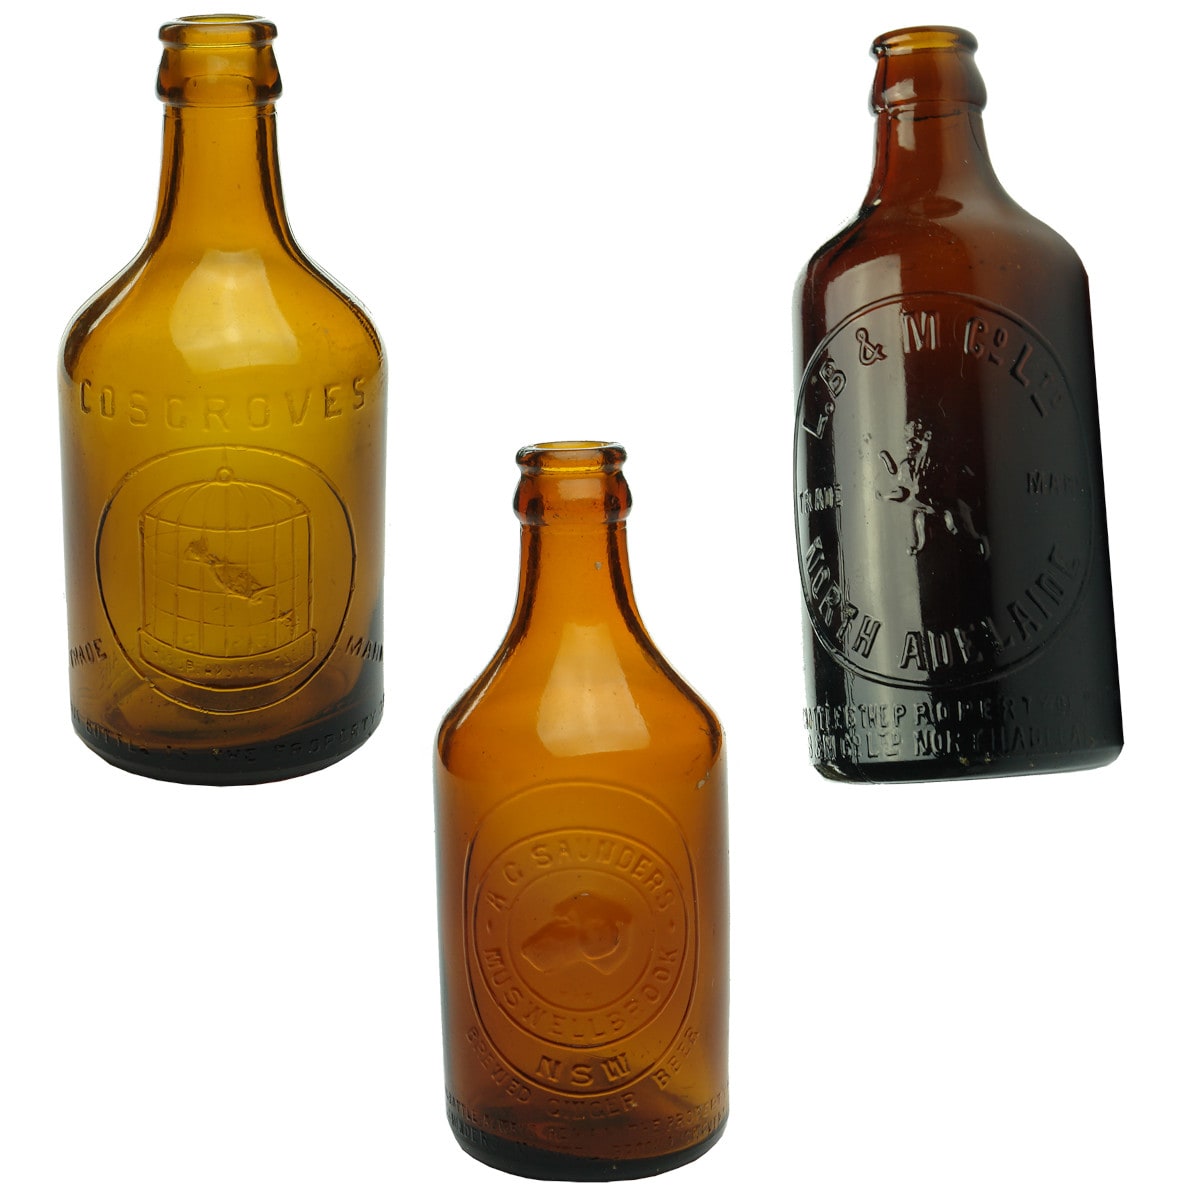 Ginger Beer. Three dump amber crown sealss: Cosgrove's, Brisbane; A. G. Saunders, Muswellbrook; L. B & M Co Ltd, North Adelaide. (Queensland, New South Wales, South Australia)